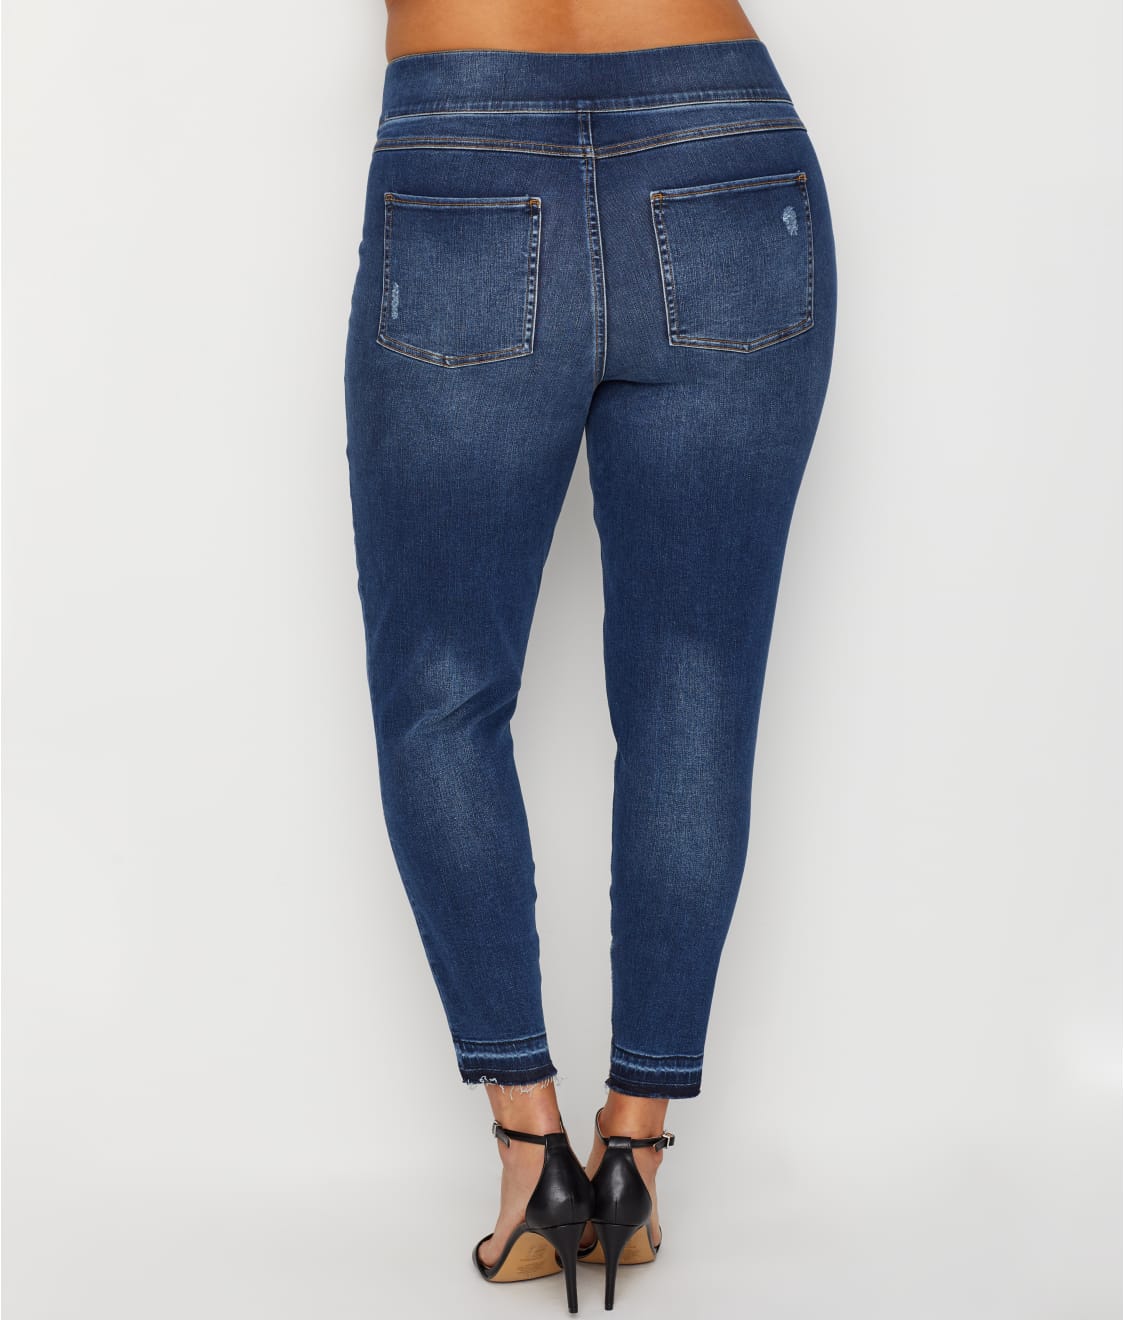 Spanx Denim Review: Supportive, Stretchy Jeans That Feel Like Leggings